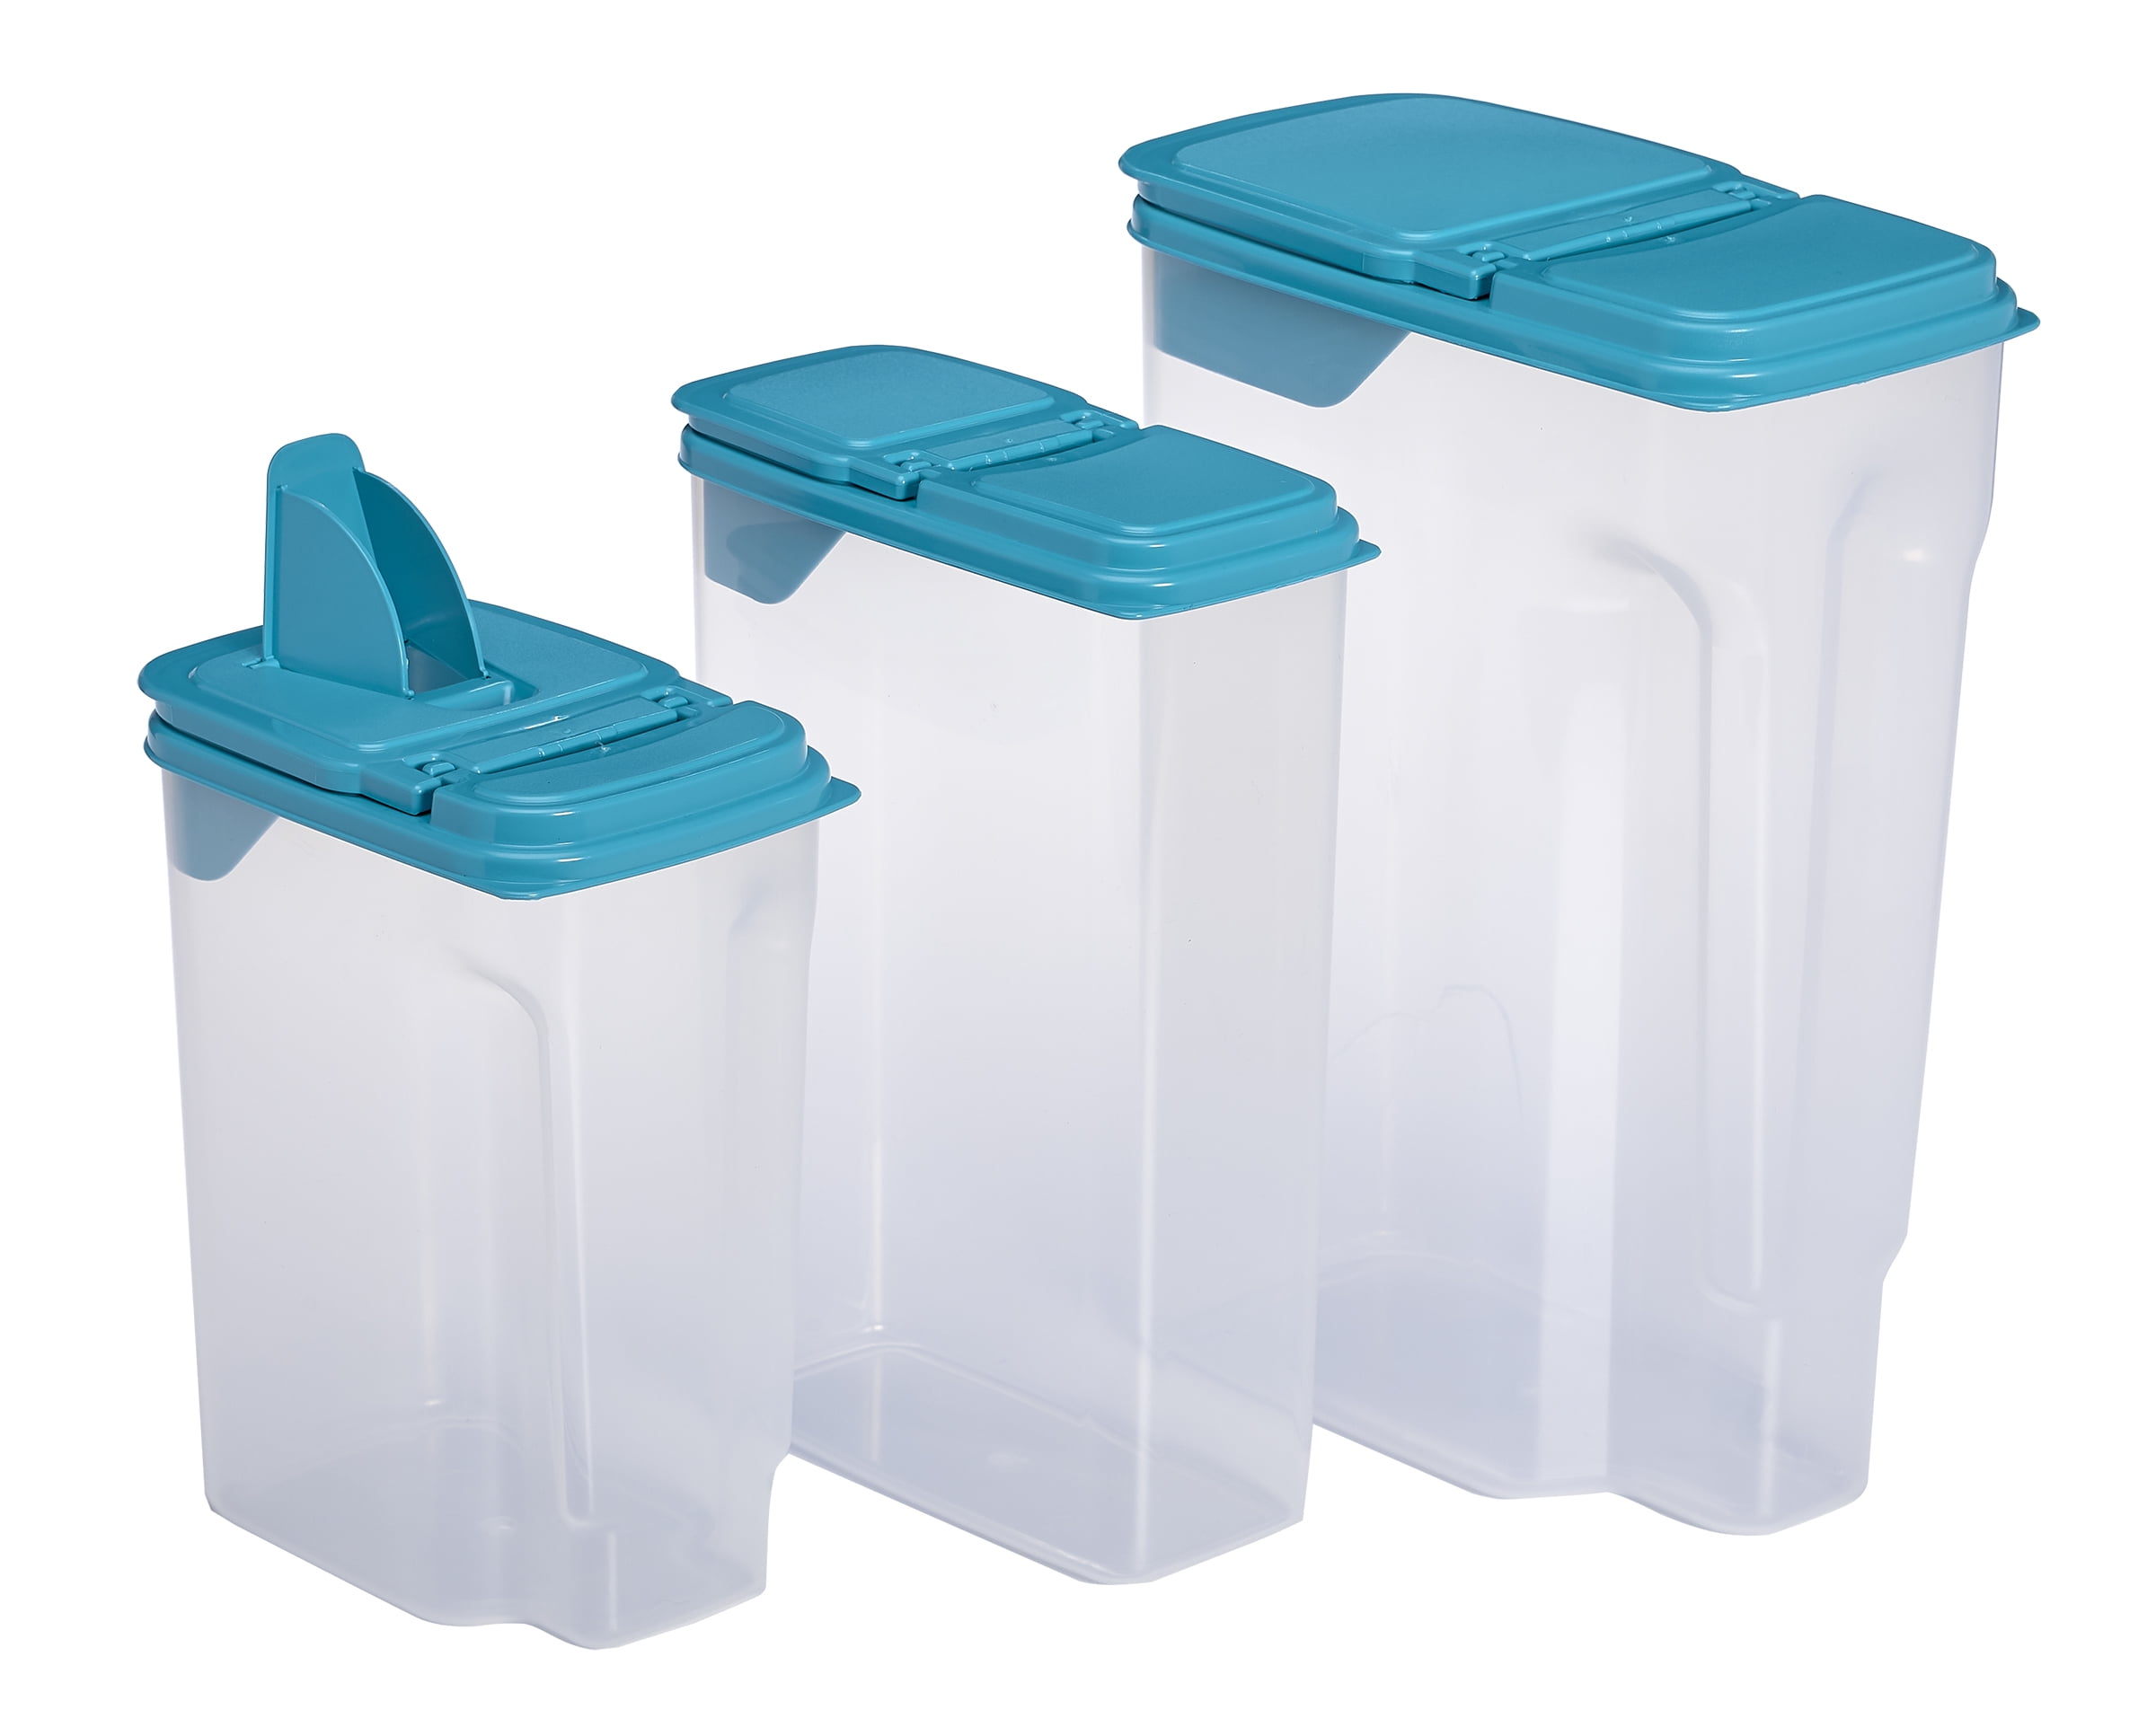 Mainstays Plastic Food Storage Containers with Flip-Top Lids, Set of 3  small medium and large 